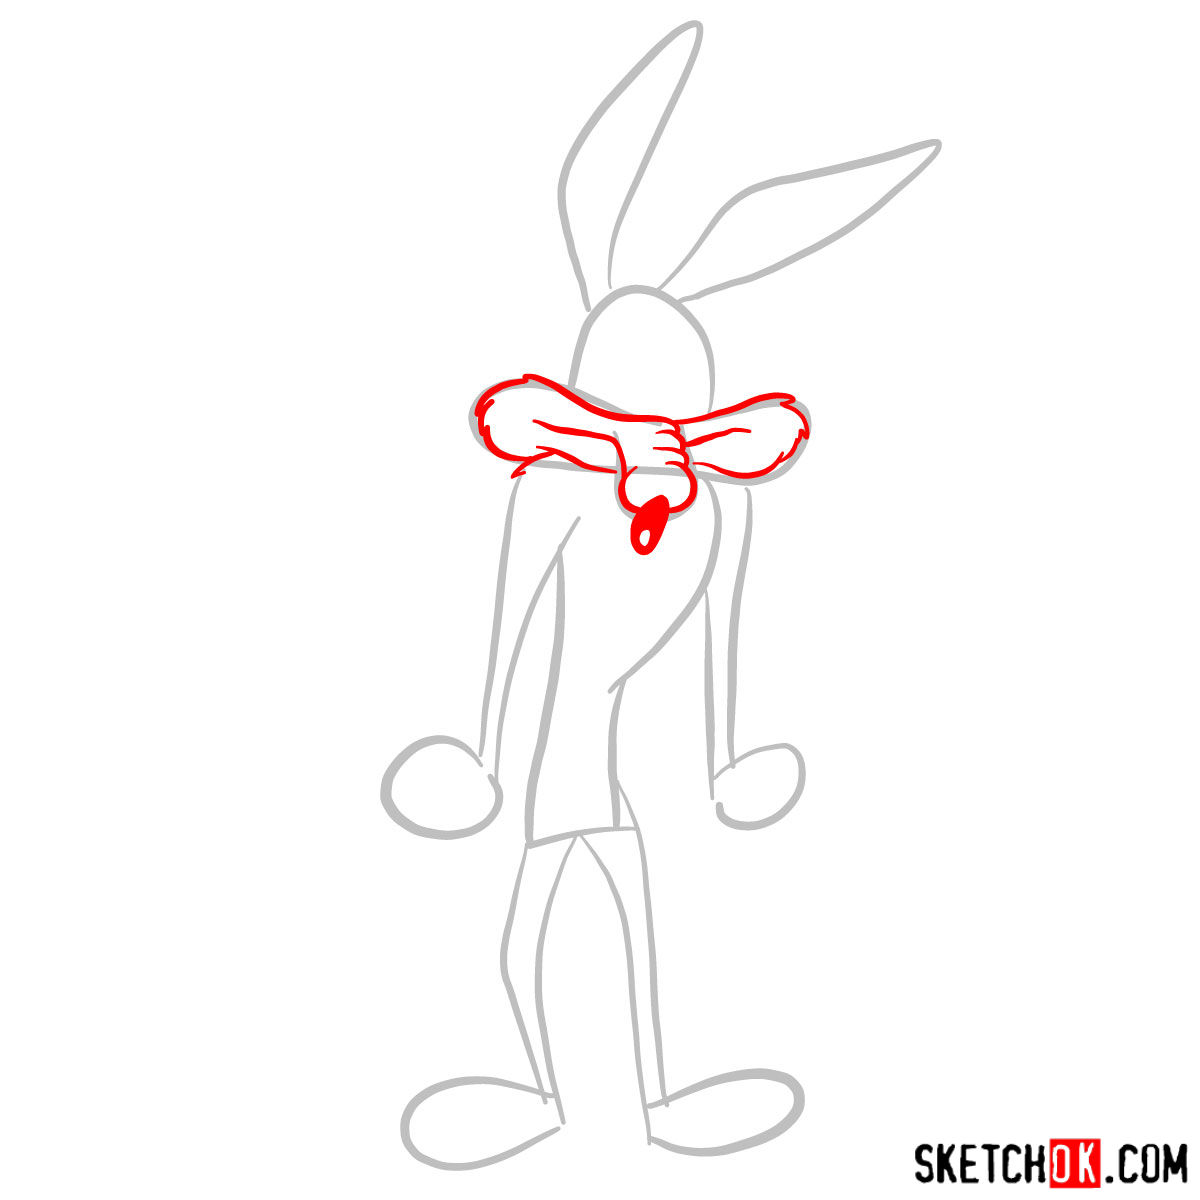 How to draw Wile E. Coyote - step 02